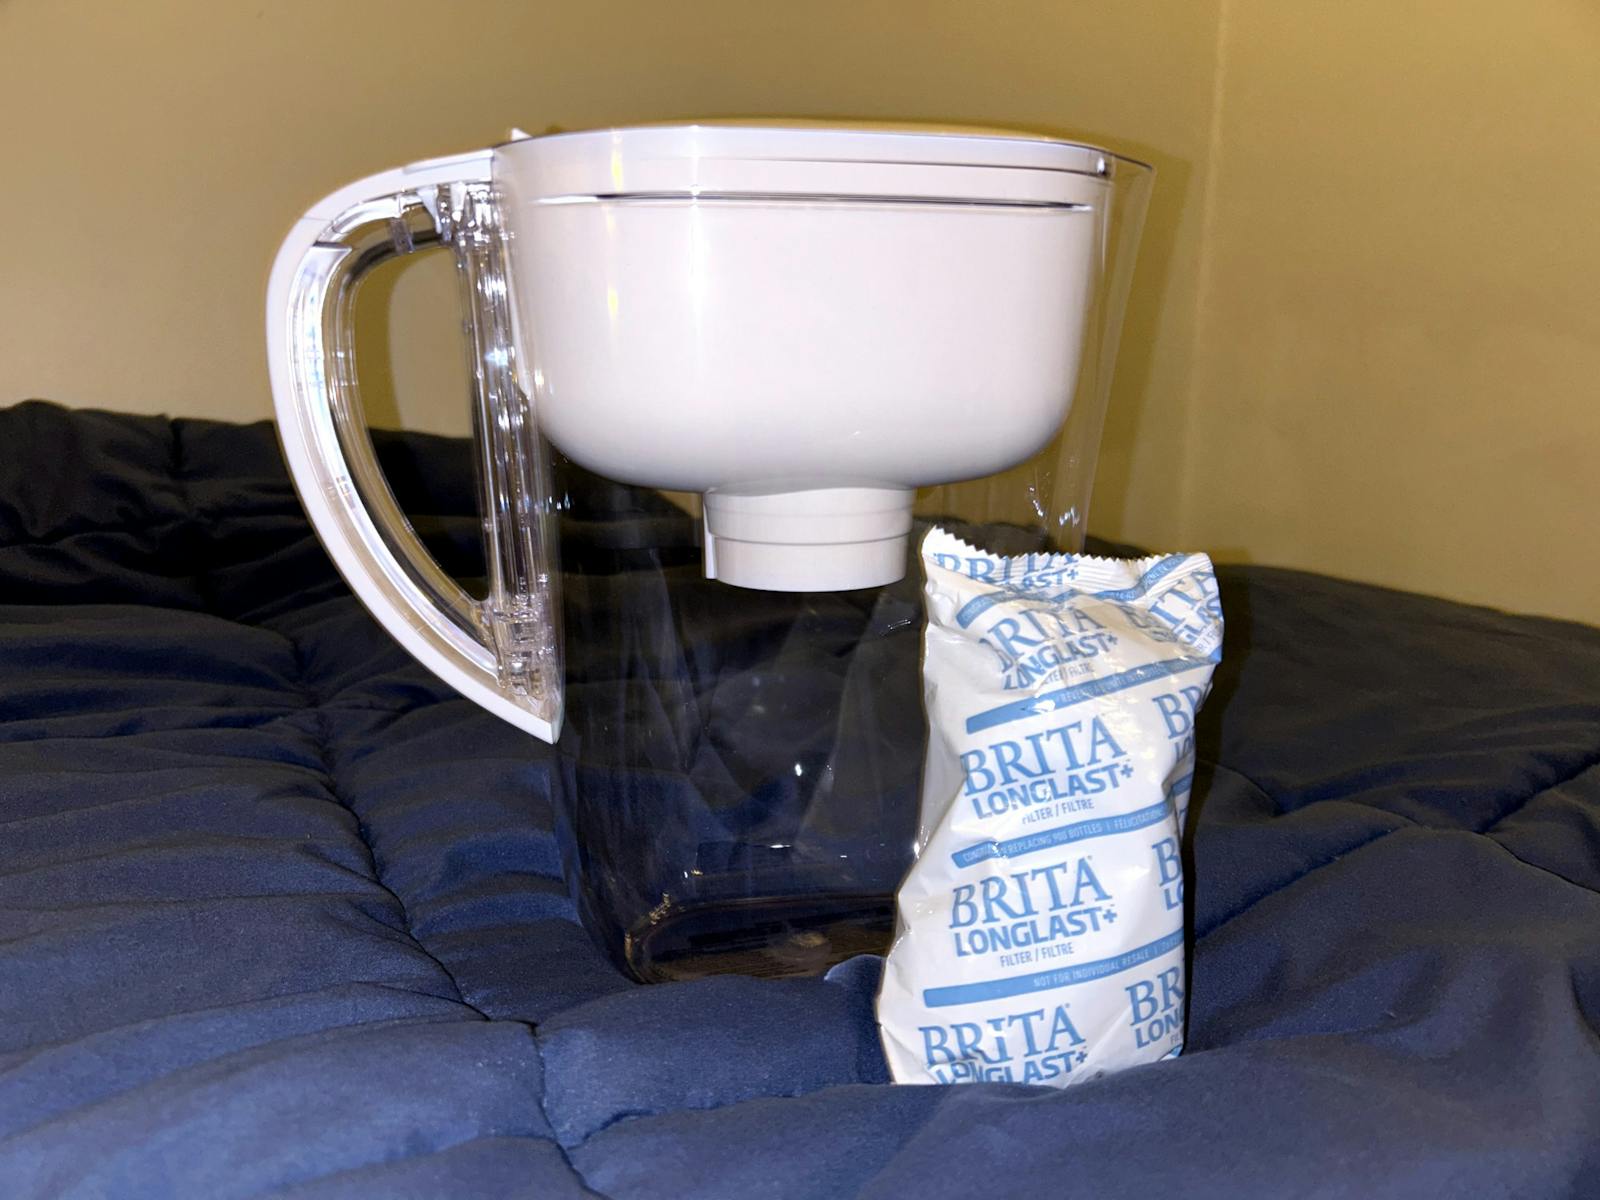 Brita, dorm room staple, faces class-action lawsuit - The Brown Daily Herald